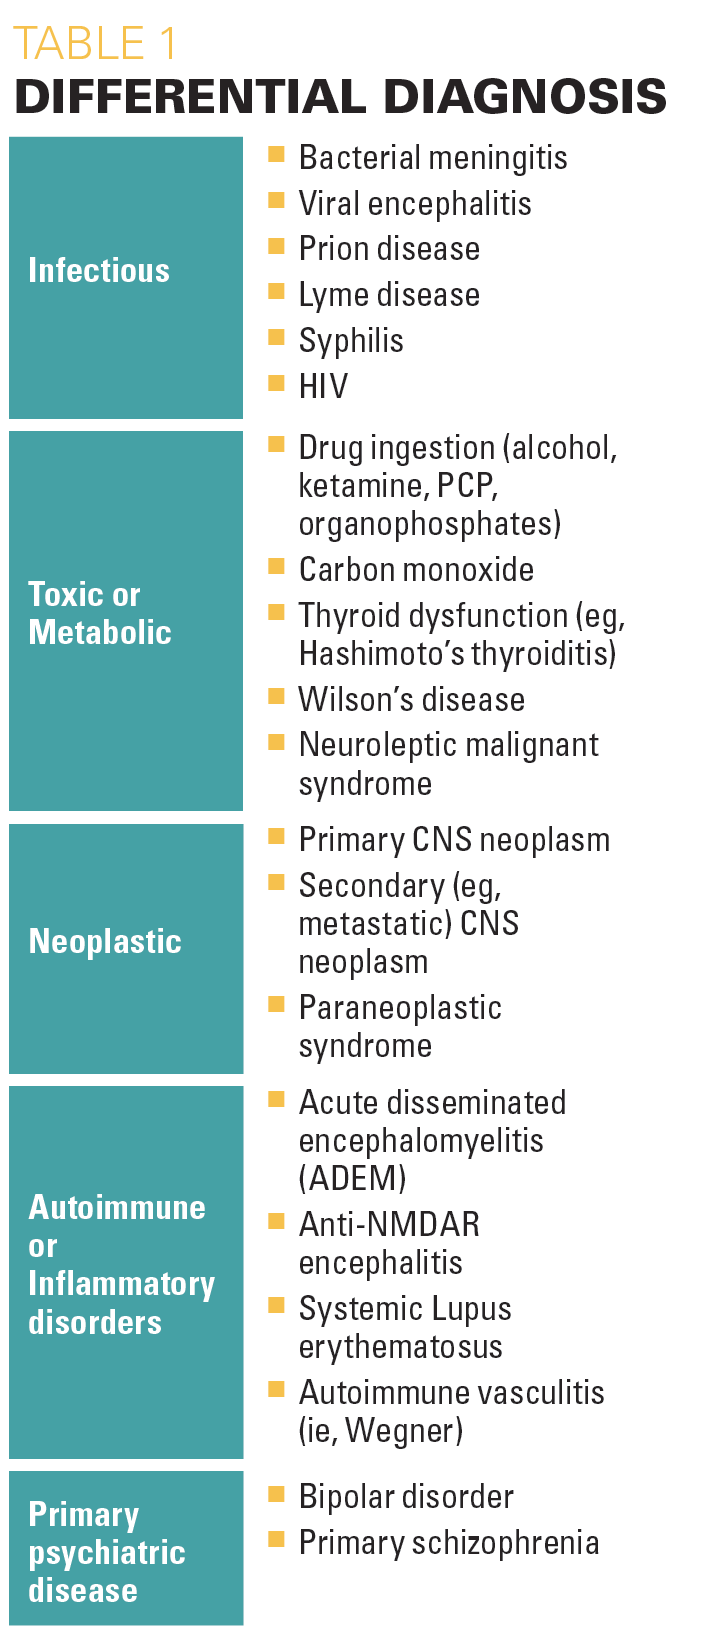 Table 1: Differential diagnosis